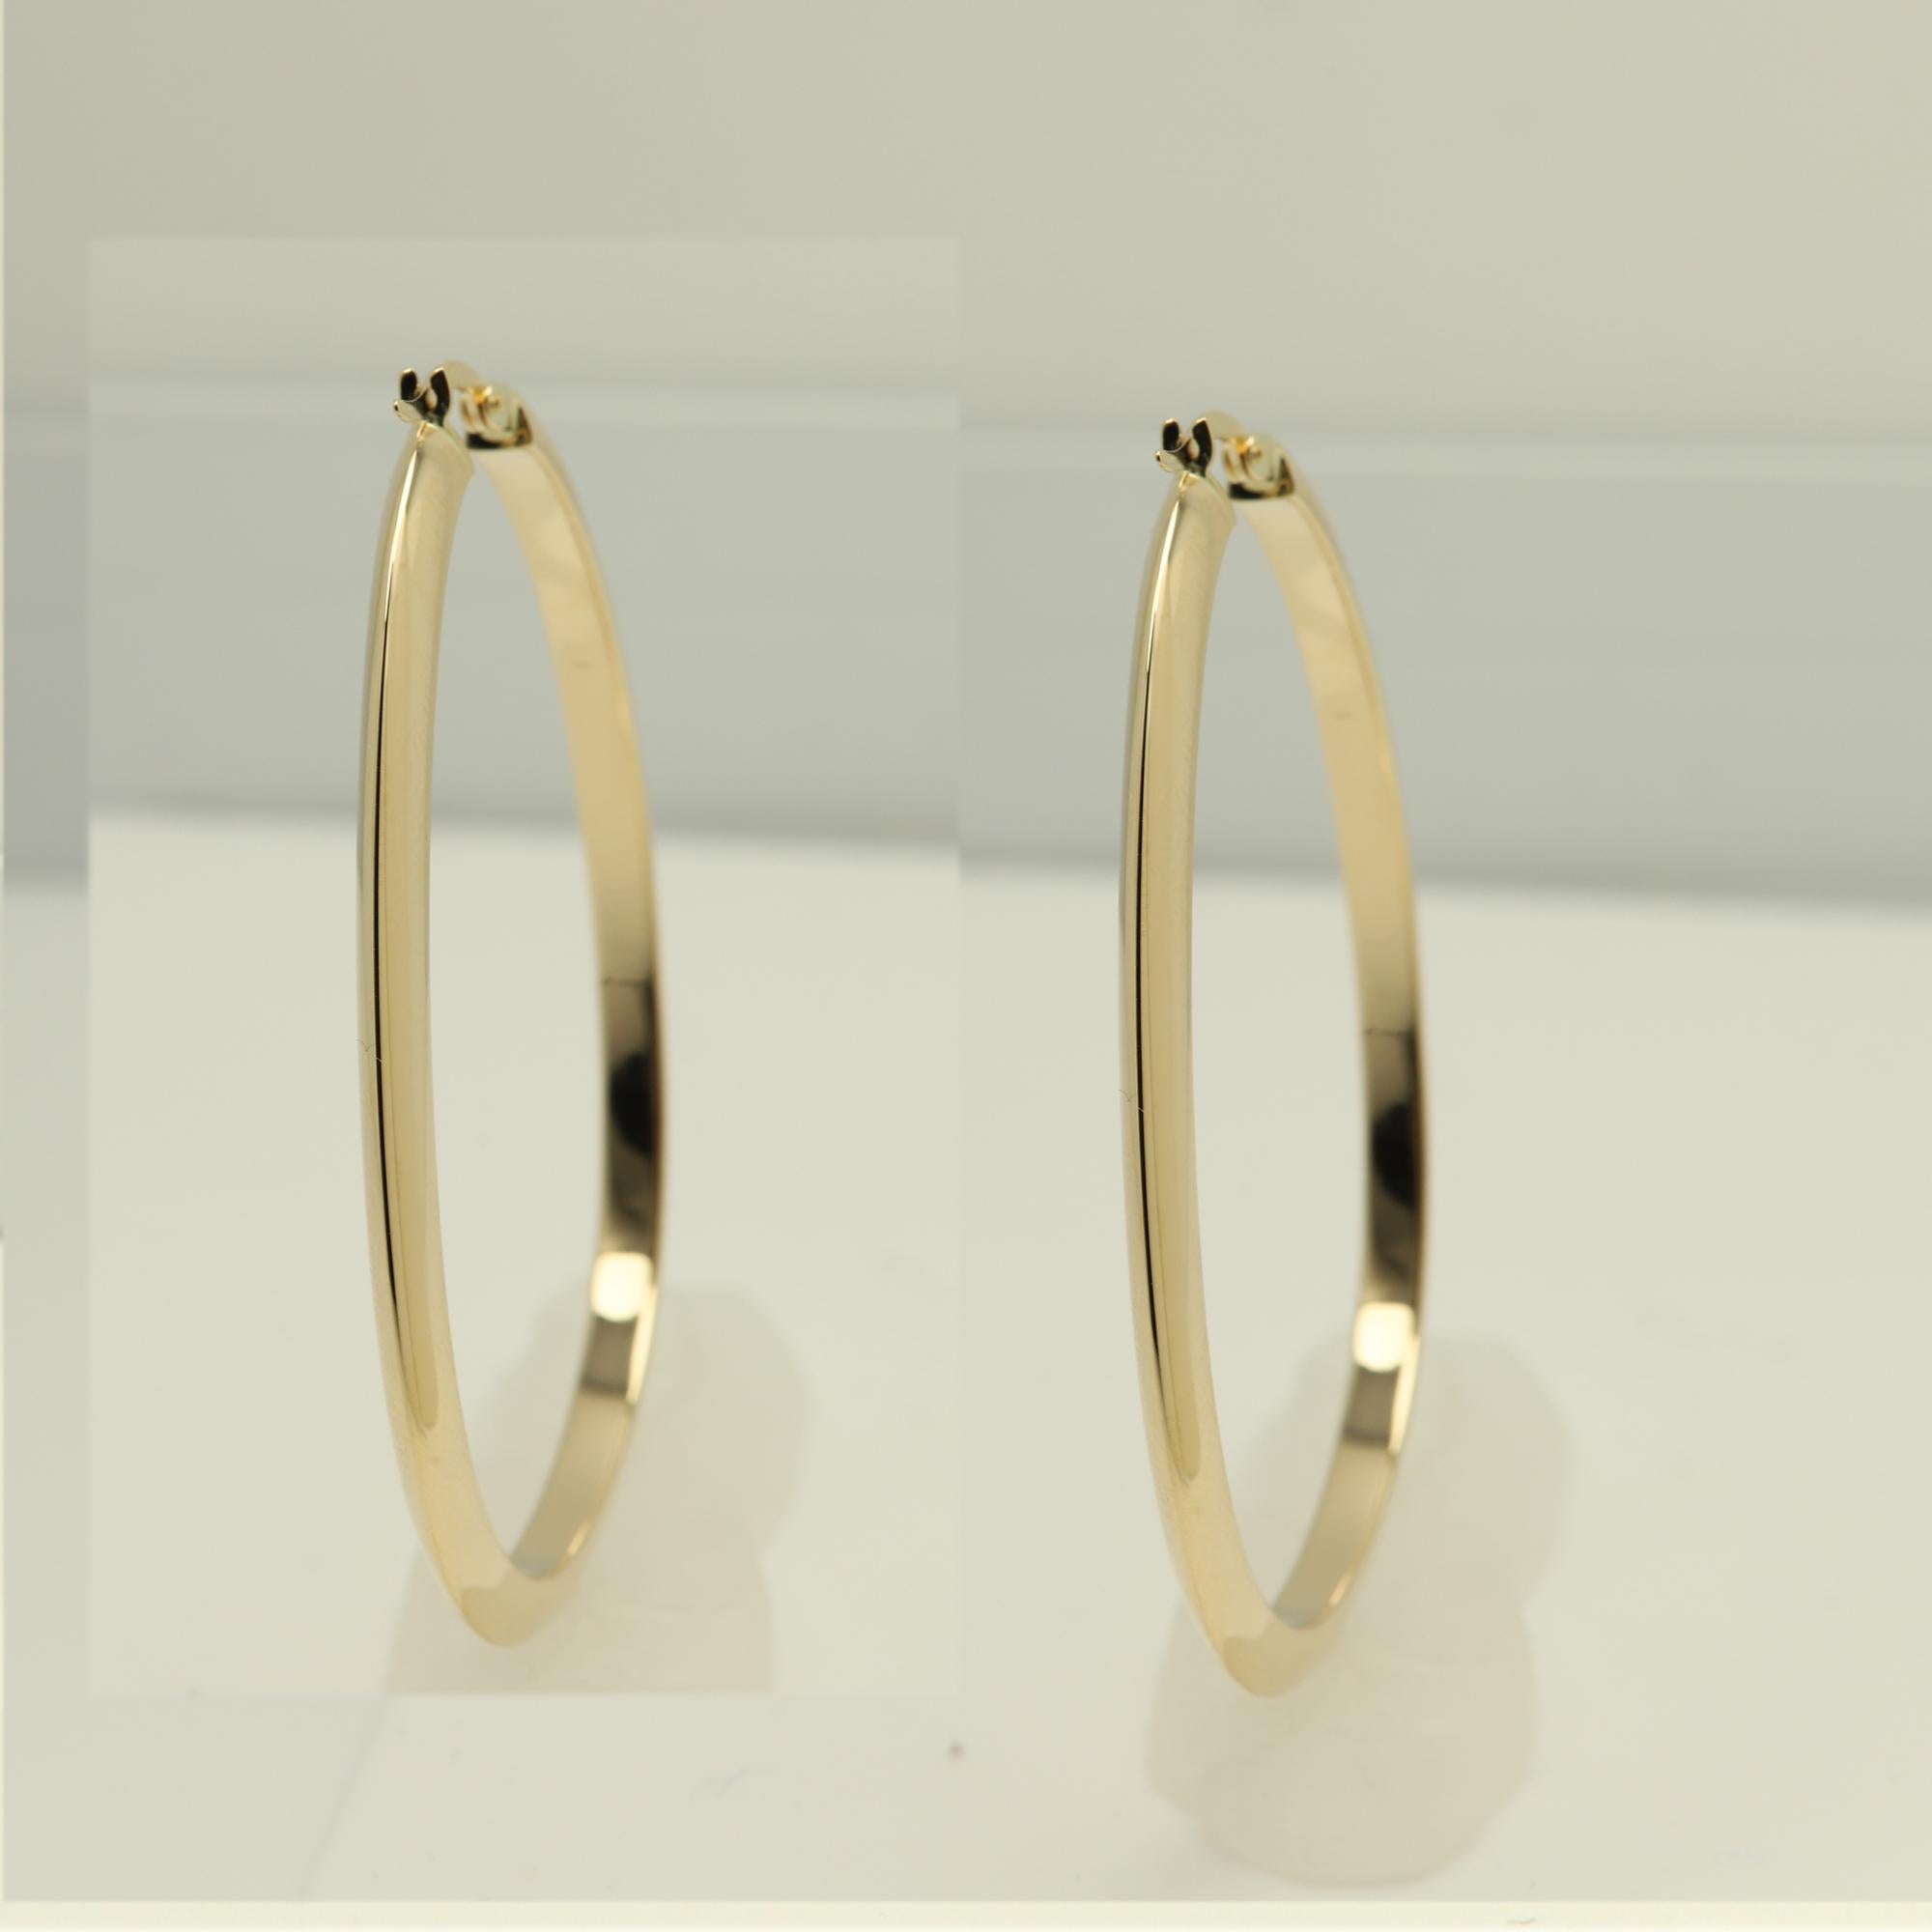 Made in Italy
Popular trendy Gold Hoops 
Tall hoop design - modern look.
weight is 4.2 grams total.
14k Yellow Gold.
approx size: 2' Inch long x 1.5' inch wide 
Standard Latch Back.
+Gift Box
(#4.2gr)